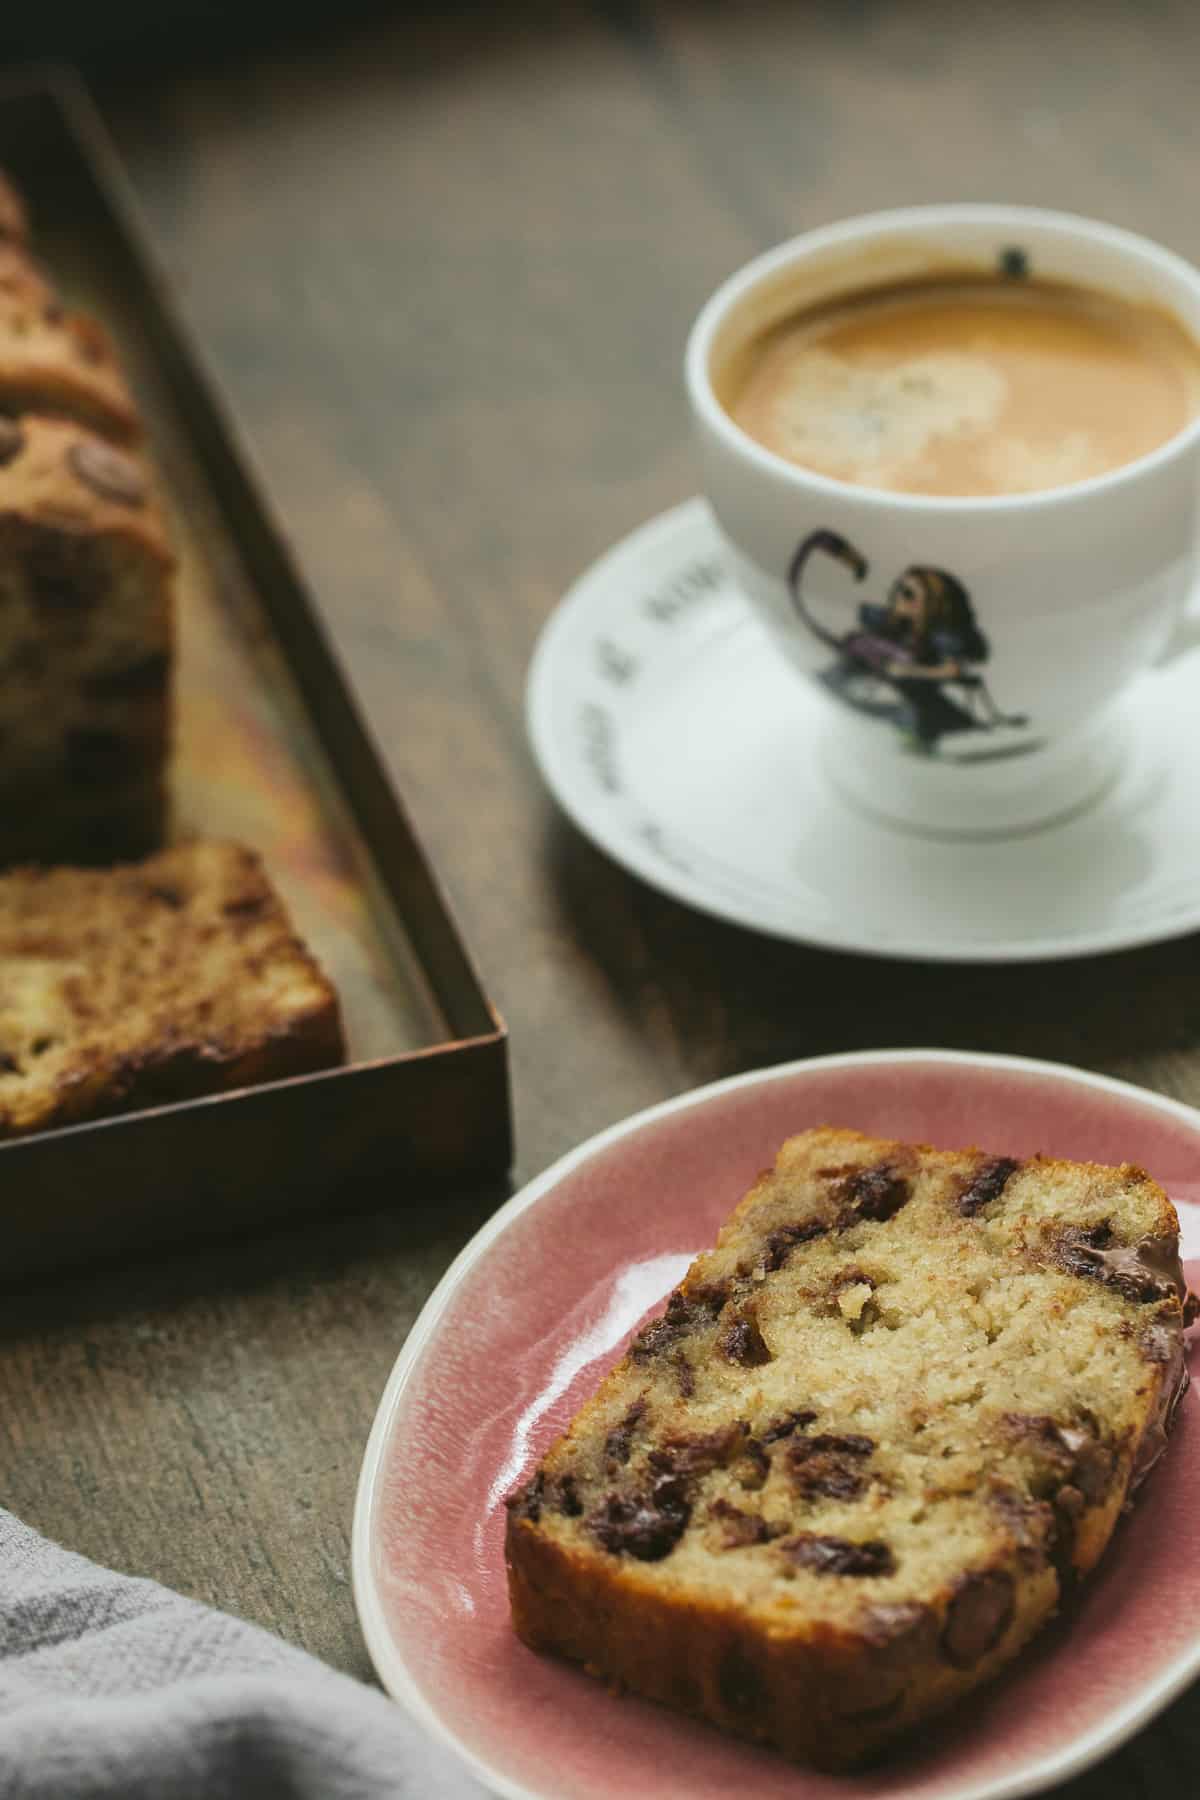 A slice of banana loaf on a pink plate. The slice has chocolate chips inside the bread. There is a cup of coffee in a decorative cup in the background. 